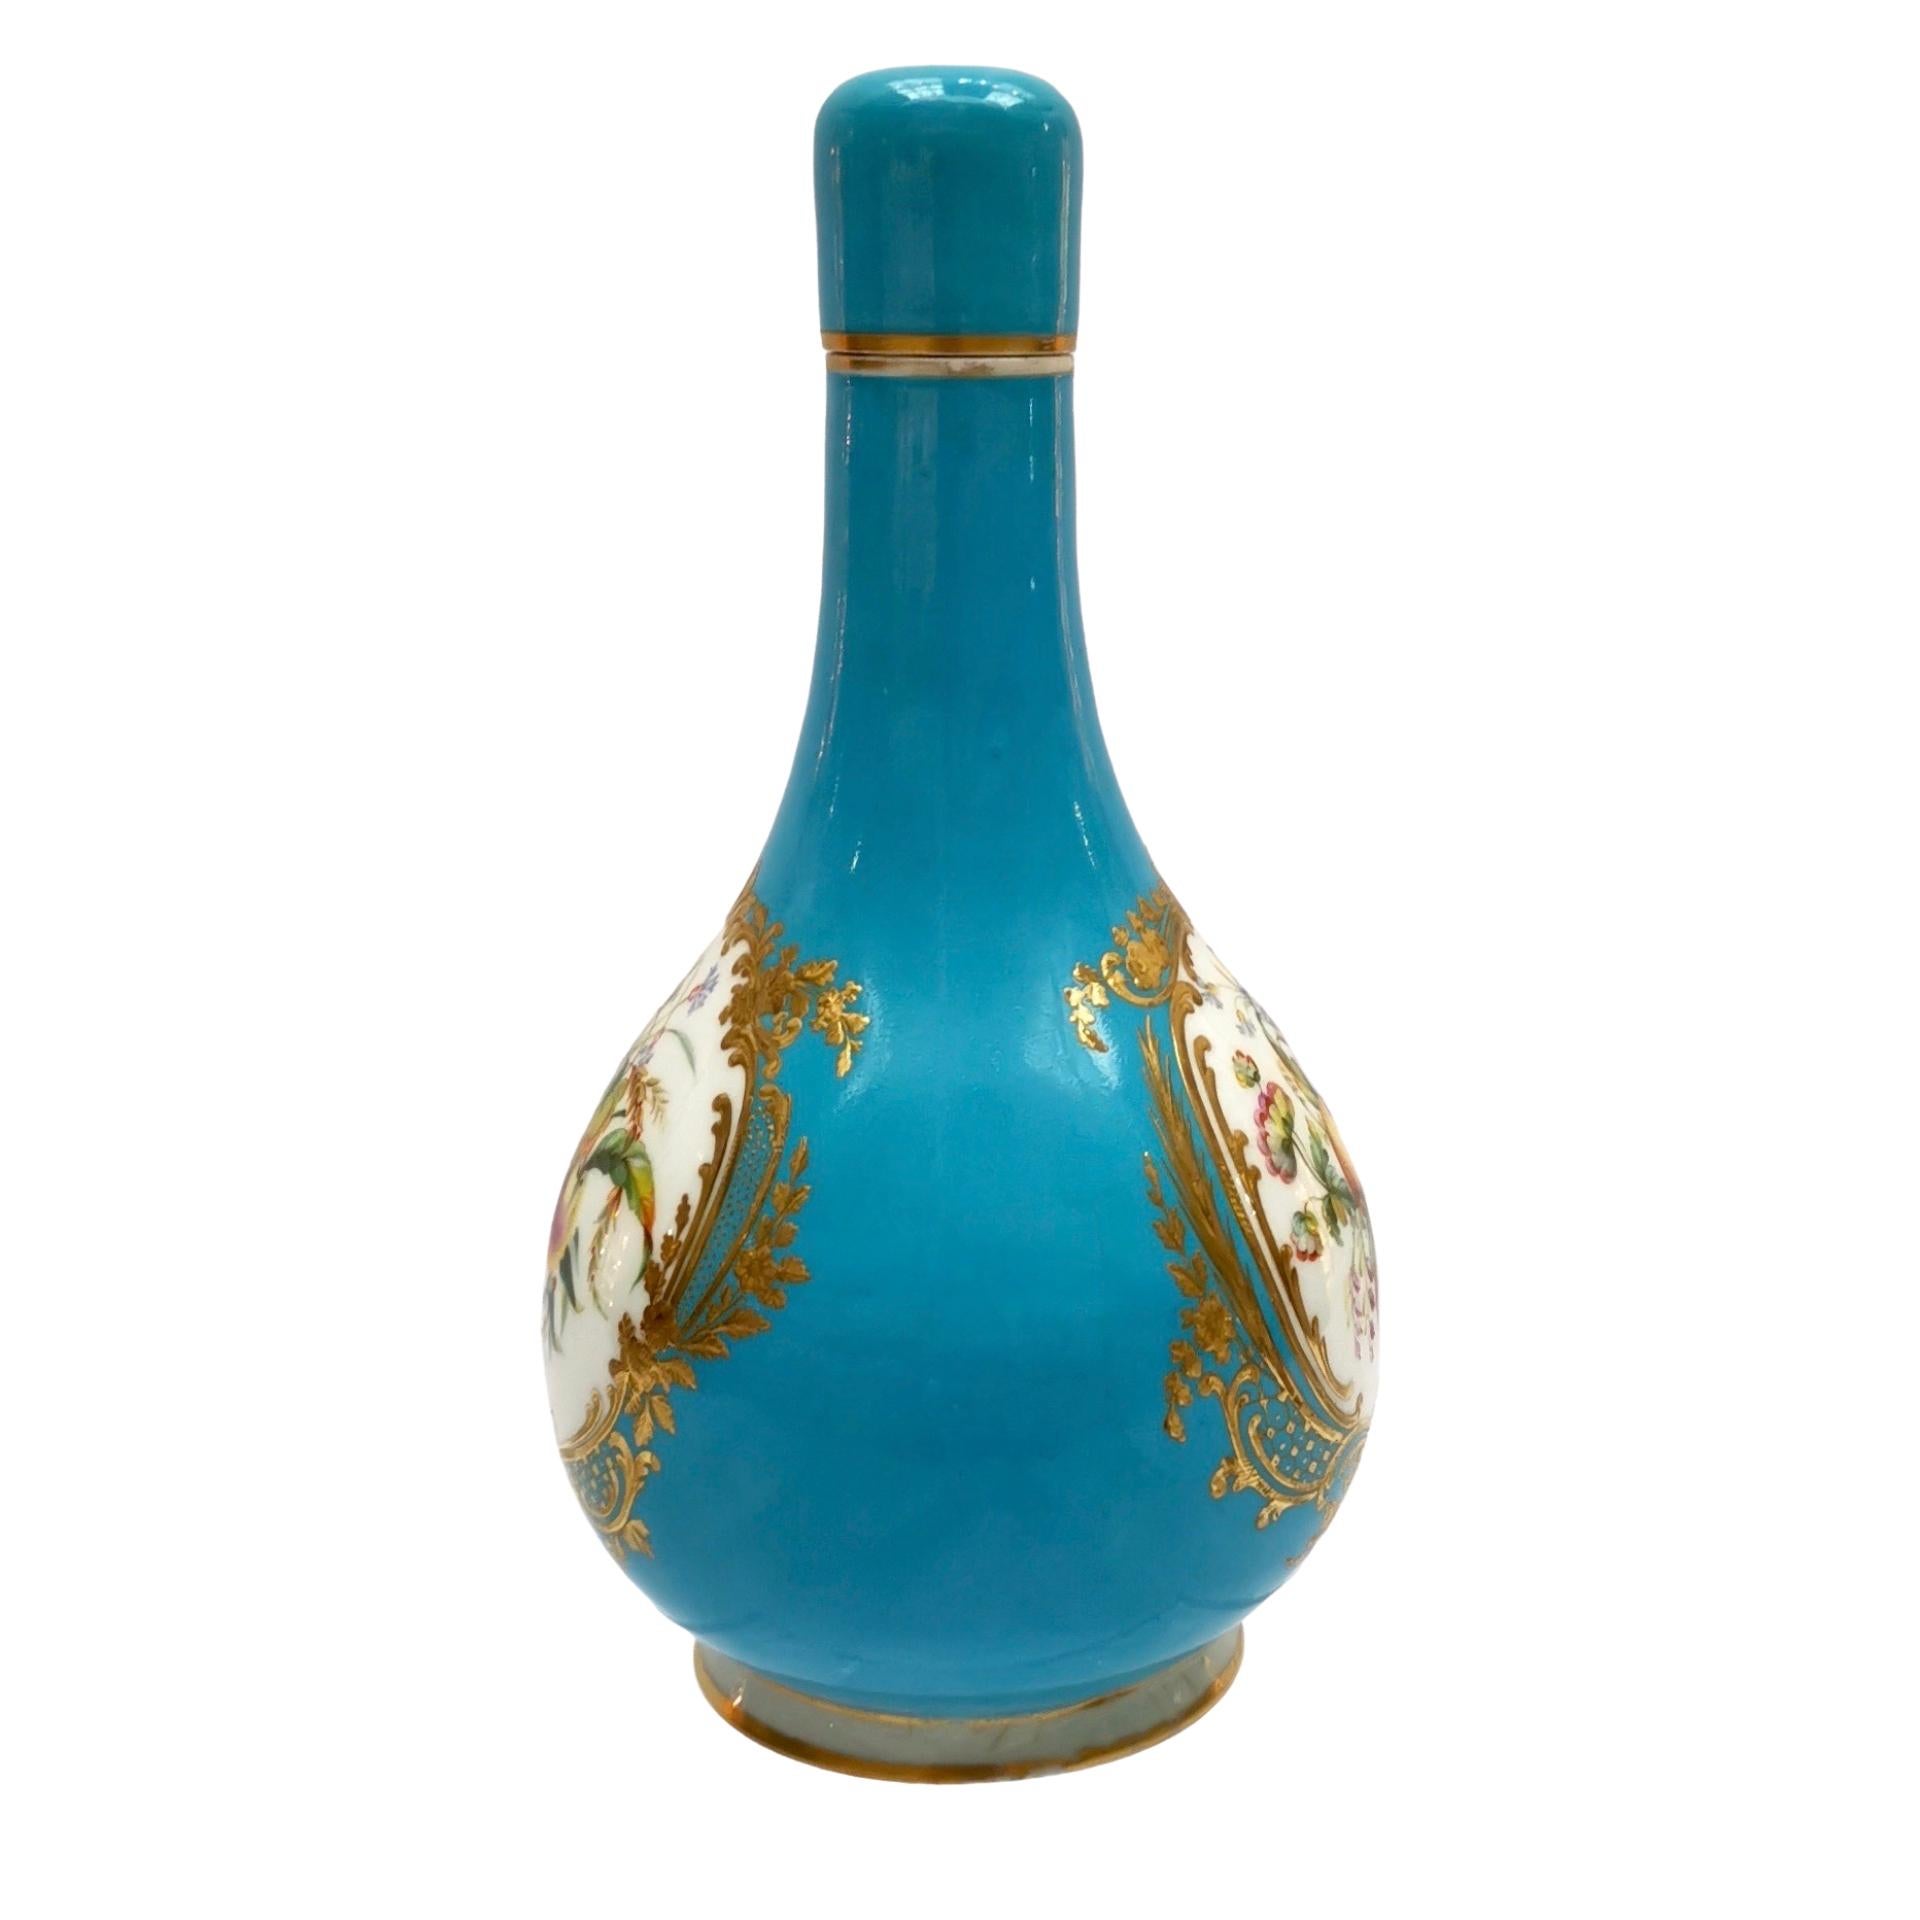 This is a beautiful little bottle vase made by Coalport between 1851 and 1861. It has stunning flower paintings by William Cook, one of the most famous painters at Coalport in the mid-19th century.

Coalport was one of the leading potters in 19th